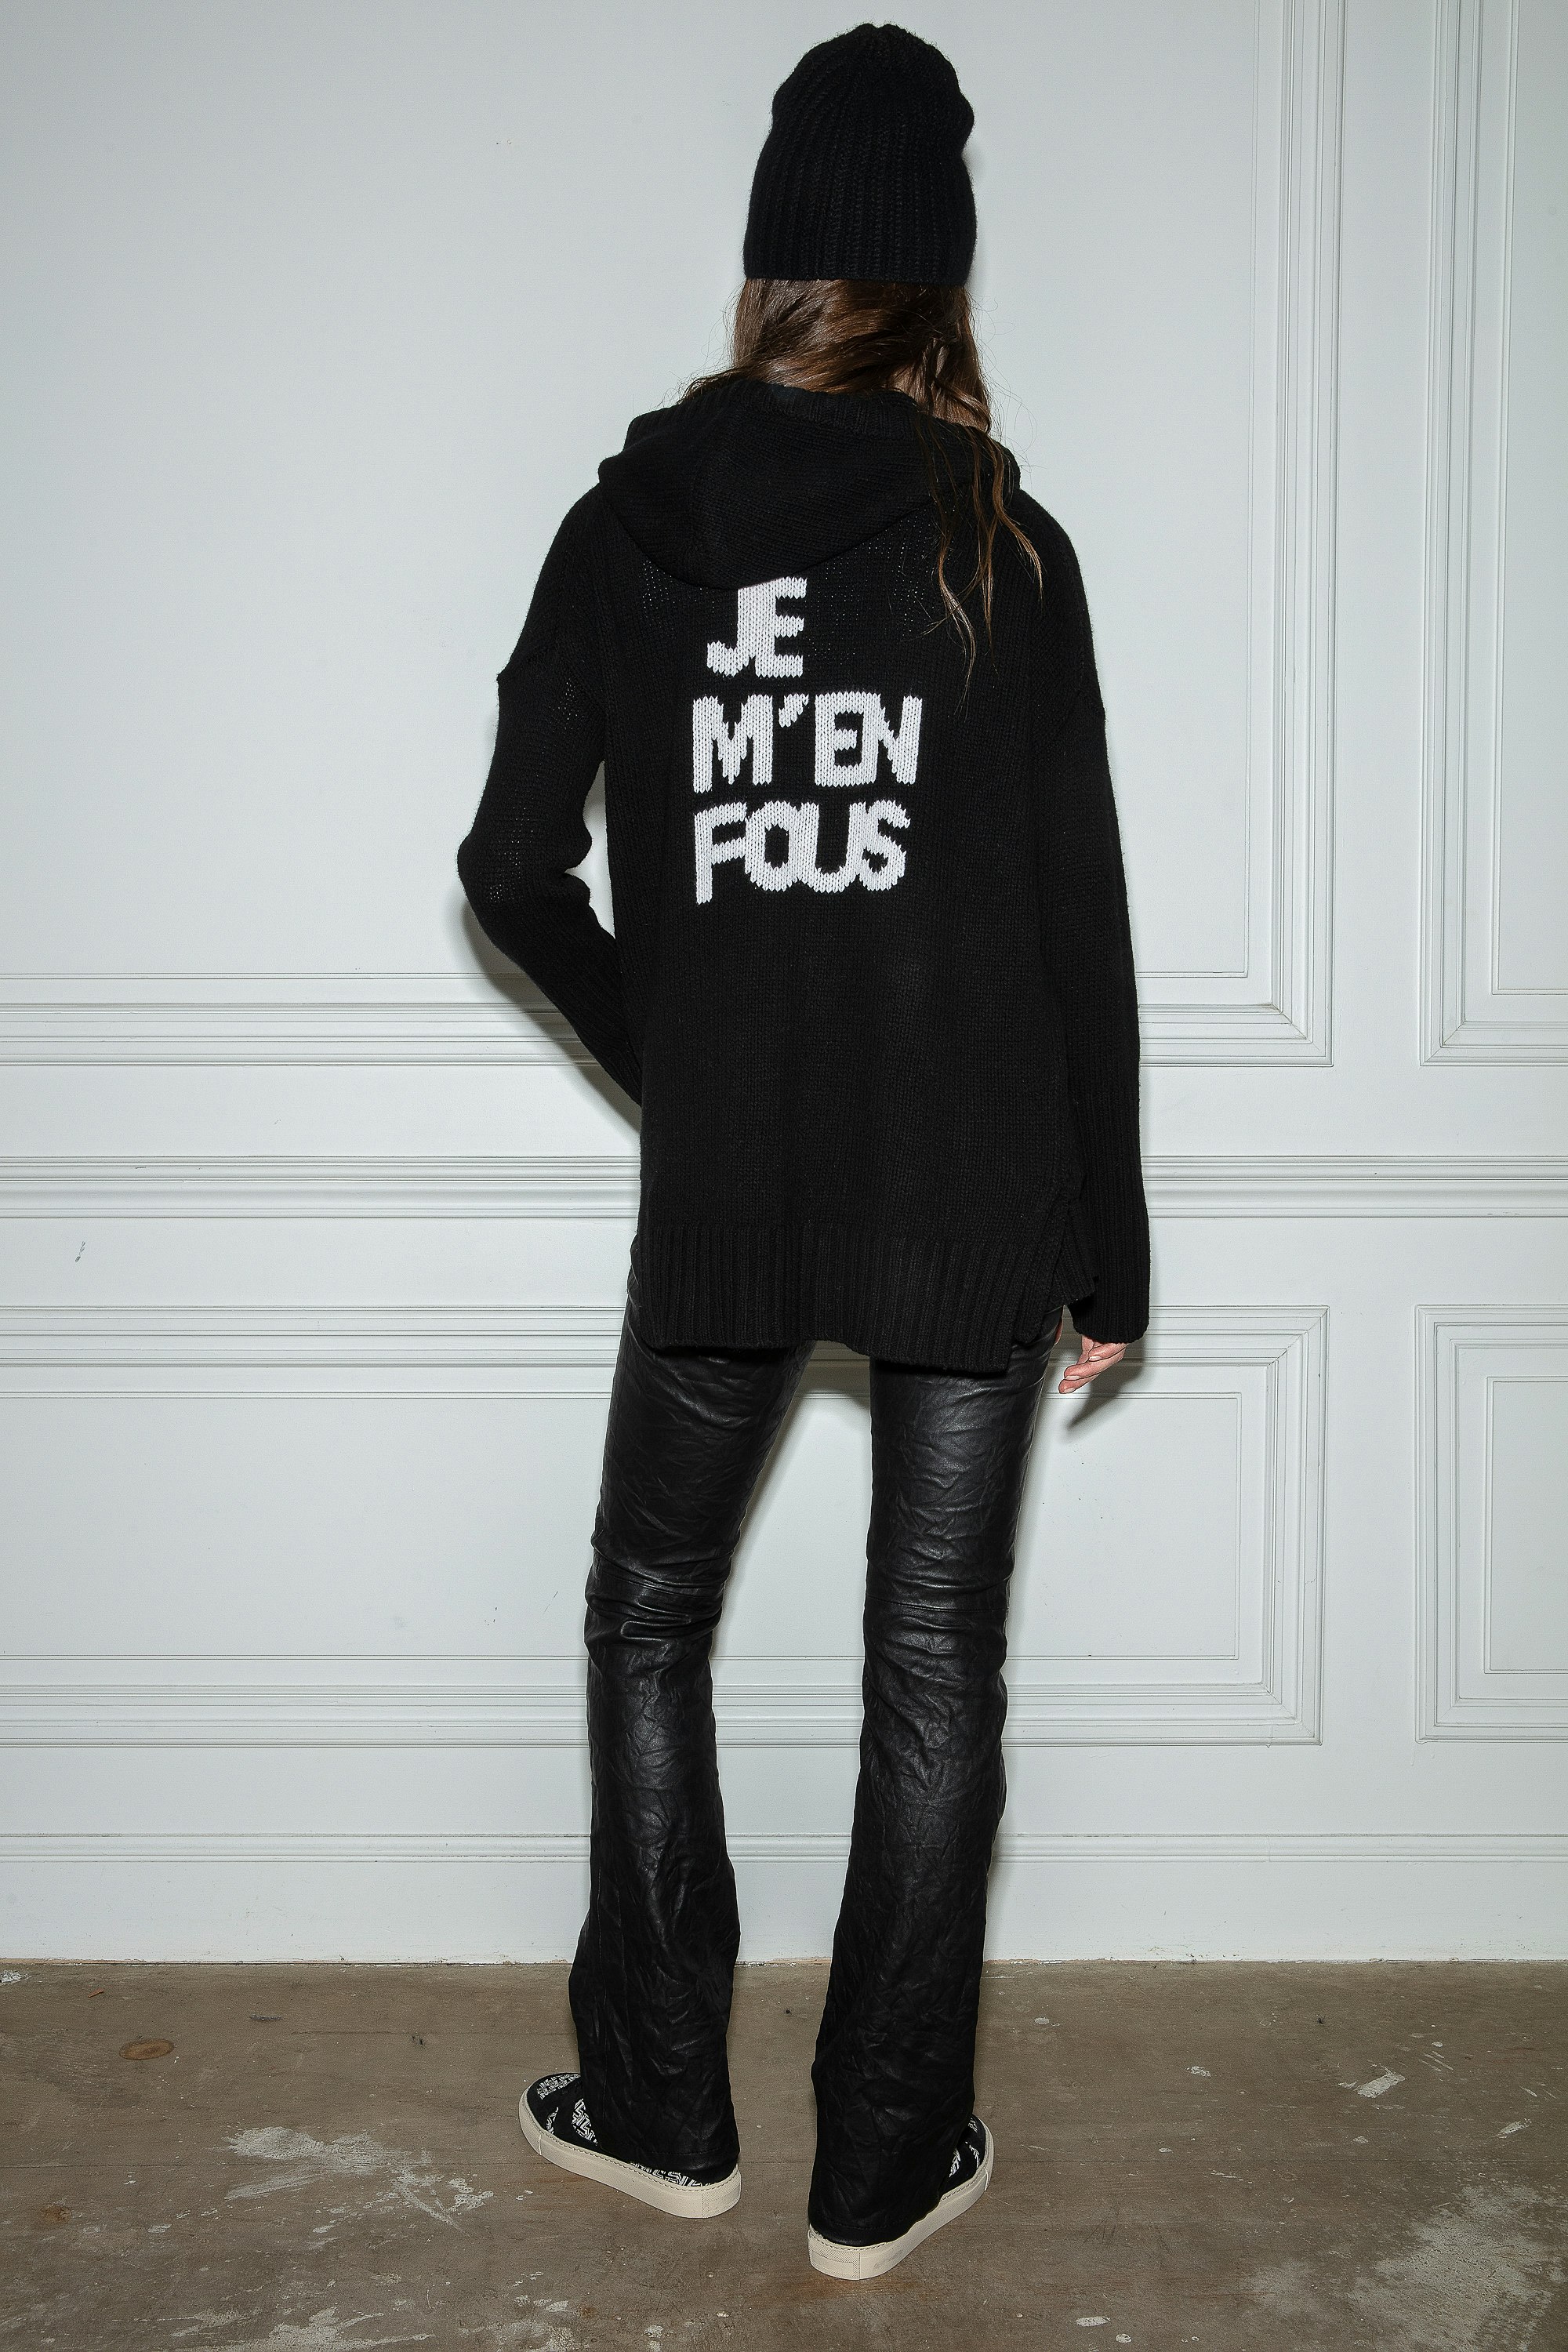 Salma We Amour Cardigan Women’s black knit cardigan with zip fastening and hood with the slogan “Je m’en fous” on the back